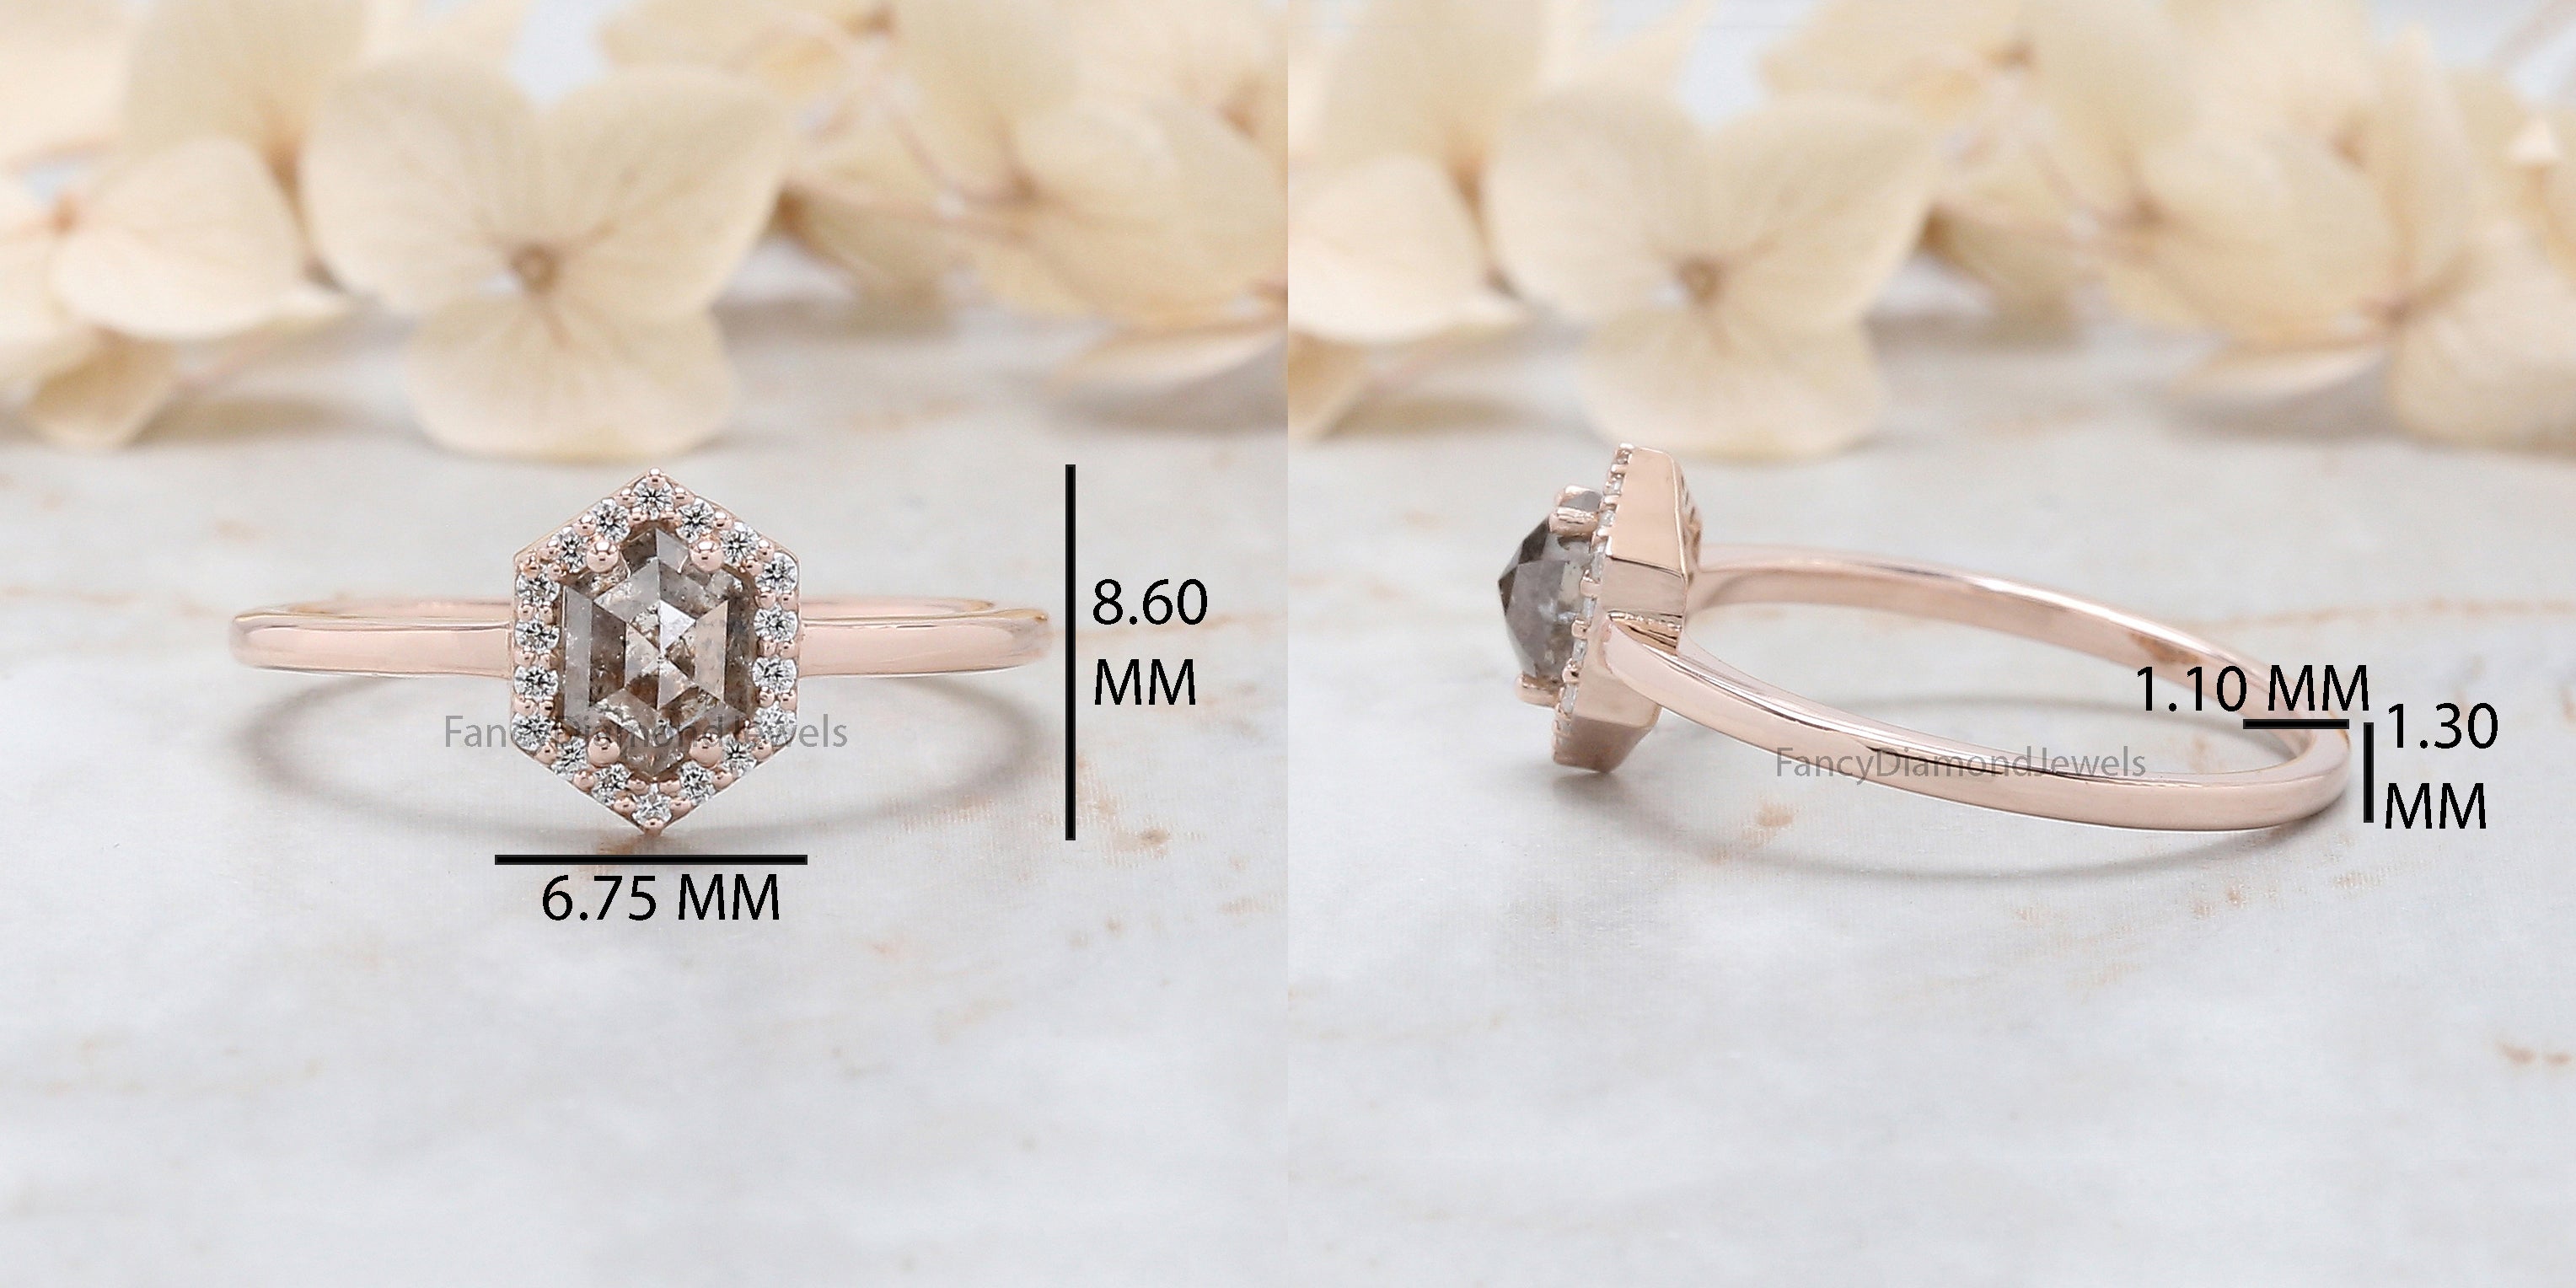 Hexagon Salt And Pepper Diamond Ring 0.63 Ct 5.70 MM Hexagon Cut Diamond Ring 14K Solid Rose Gold Silver Engagement Ring Gift For Her QL9618